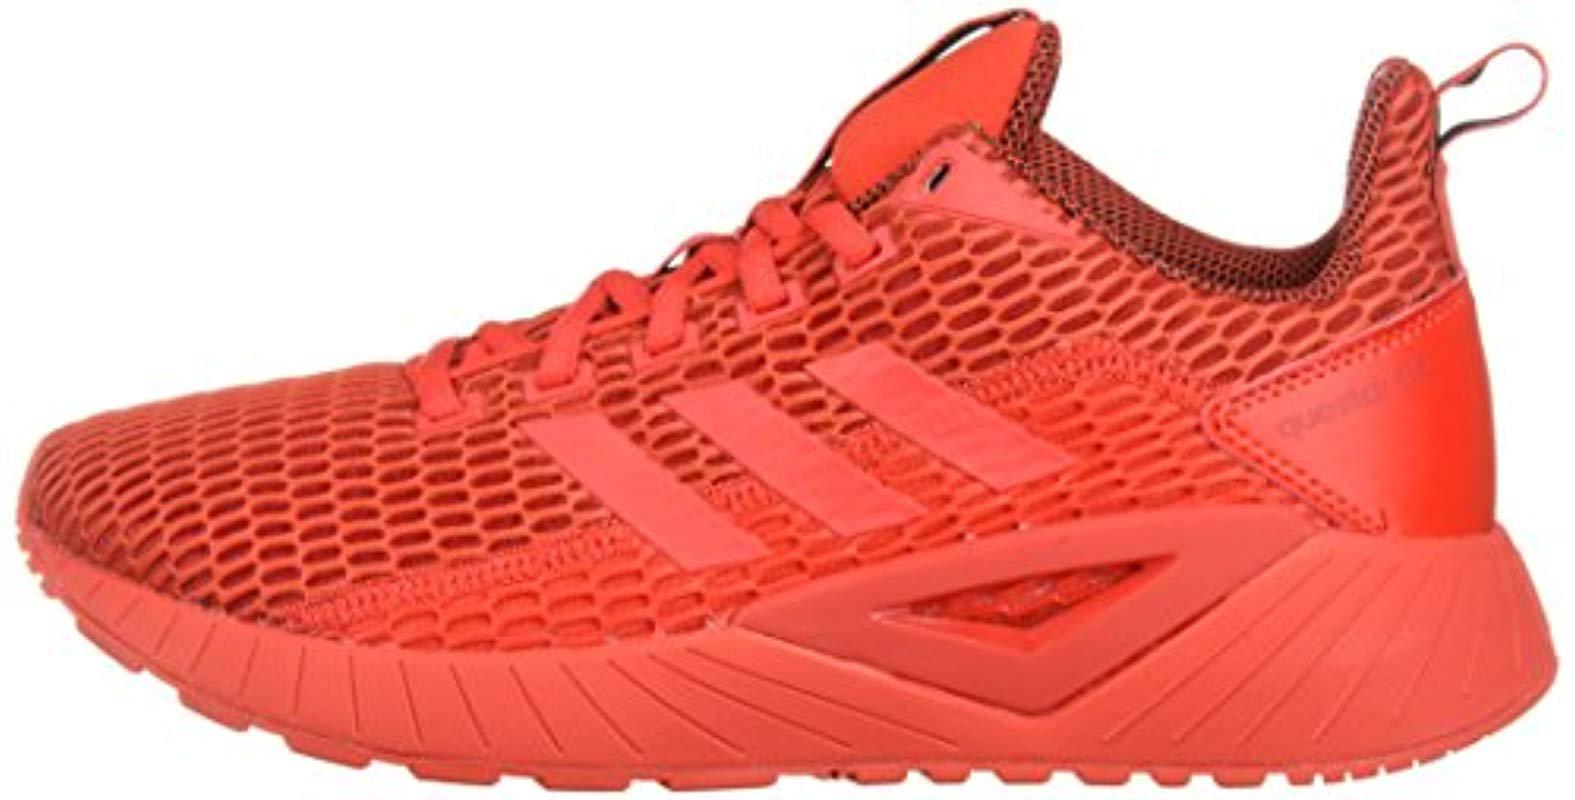 adidas Questar Cc Running Shoe in Red 